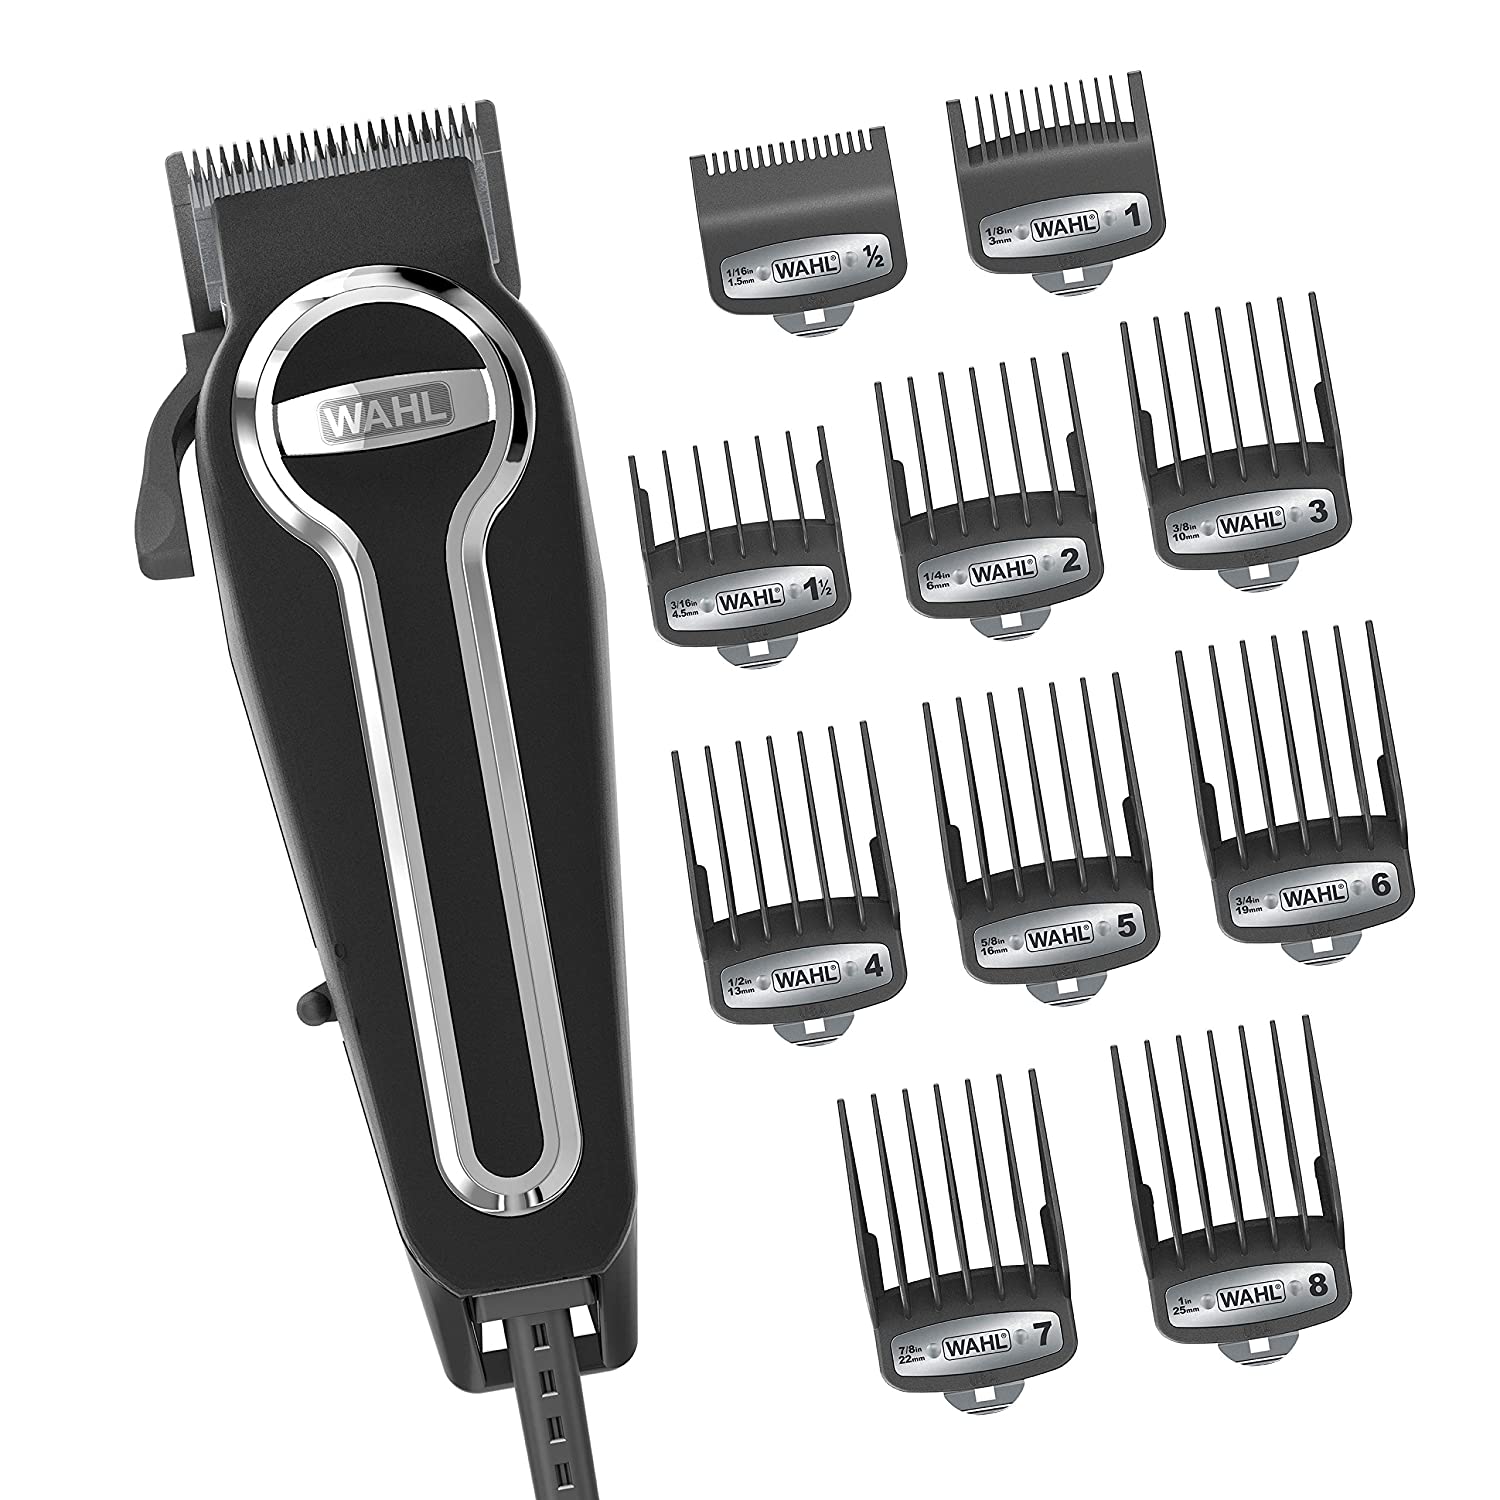 Wahl Elite Professional Haircutting Kit Hair Clippers